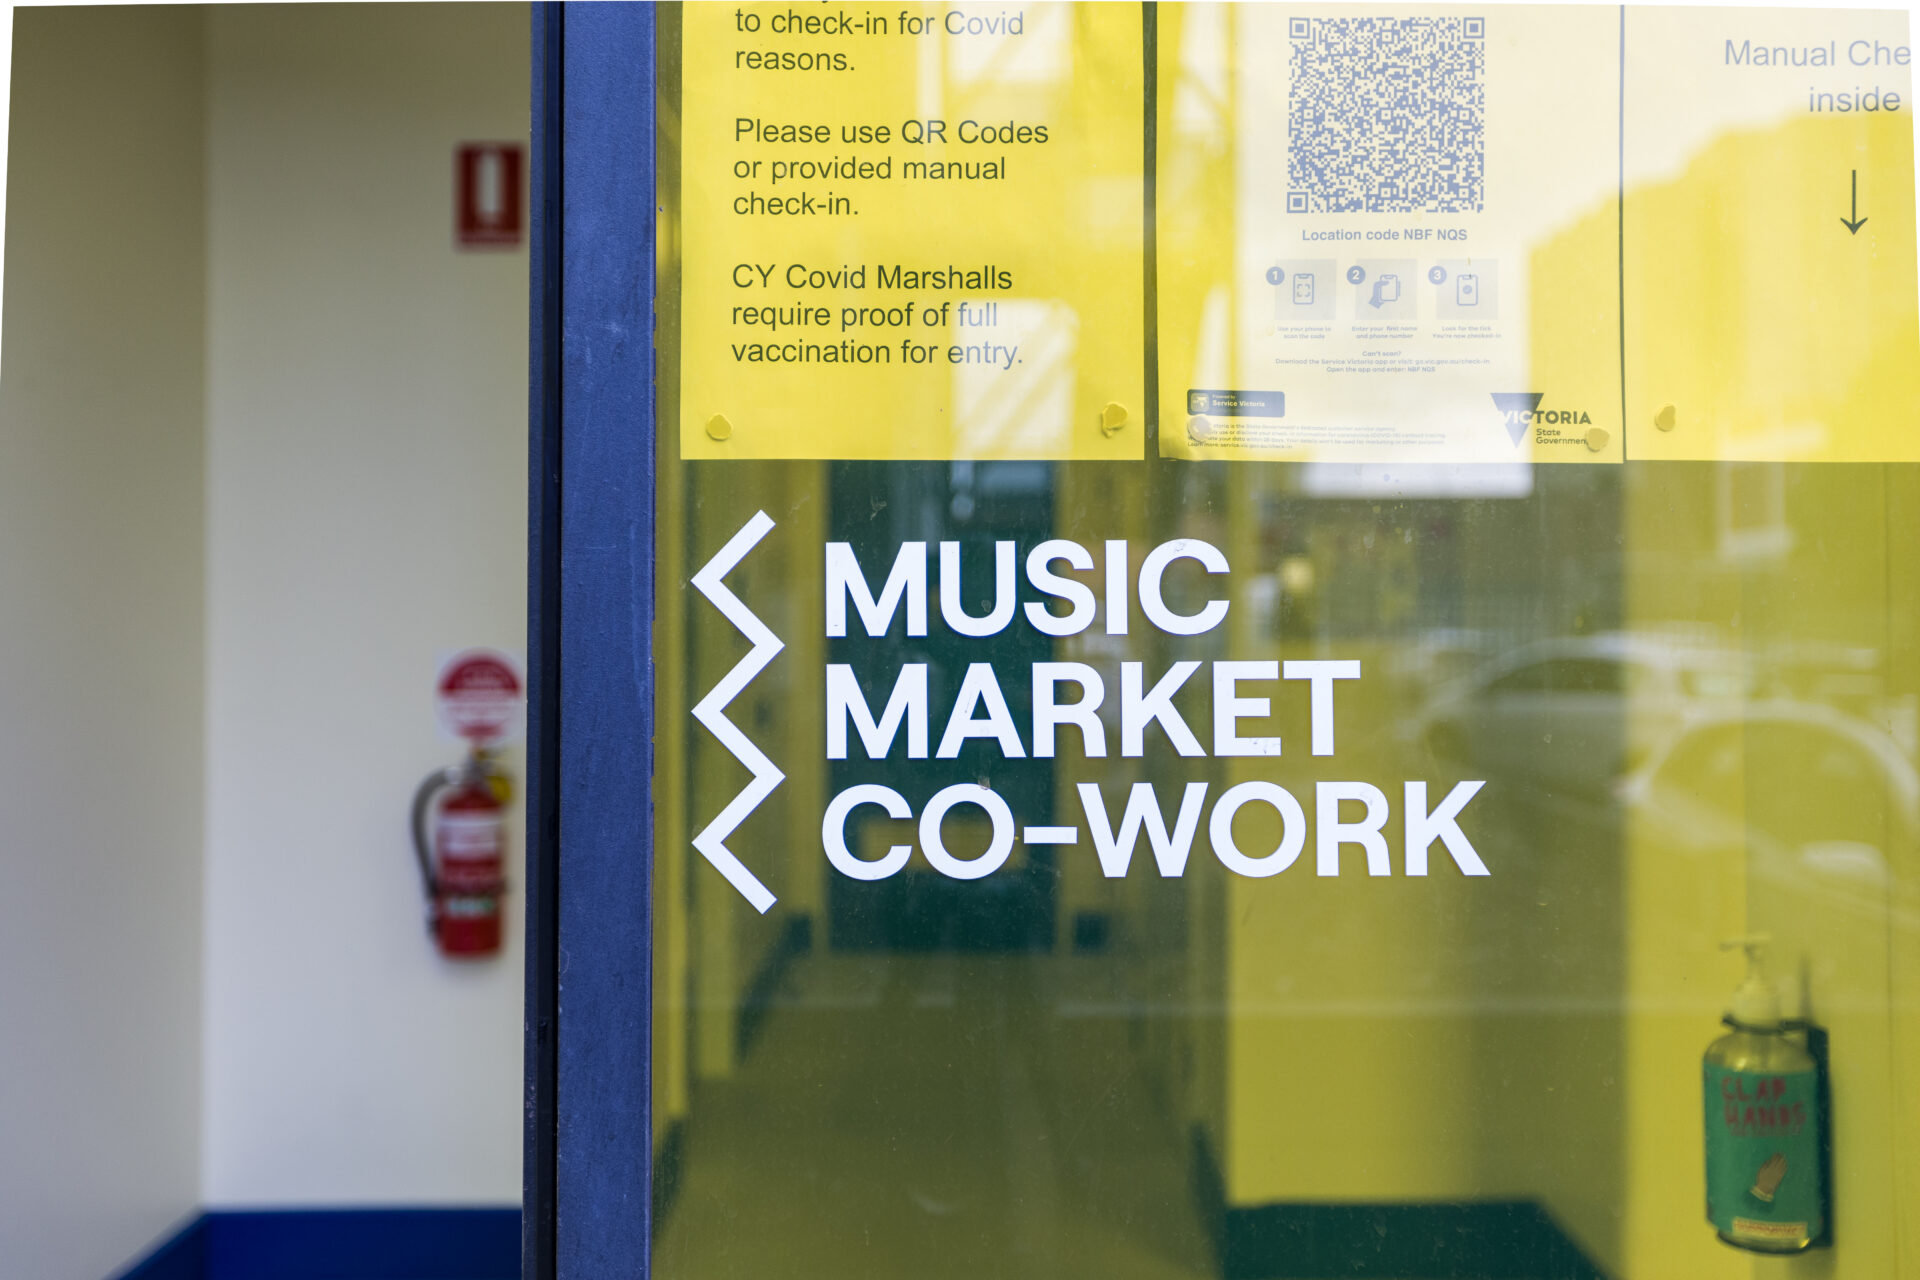 Photo of a yellow glass window with an open doorway to the left. On the window is a white logo that has a zig zag line to the left and the words "Music Market Cowork" in bold uppercase letters. Above that are Covid check-in print outs and guidelines.